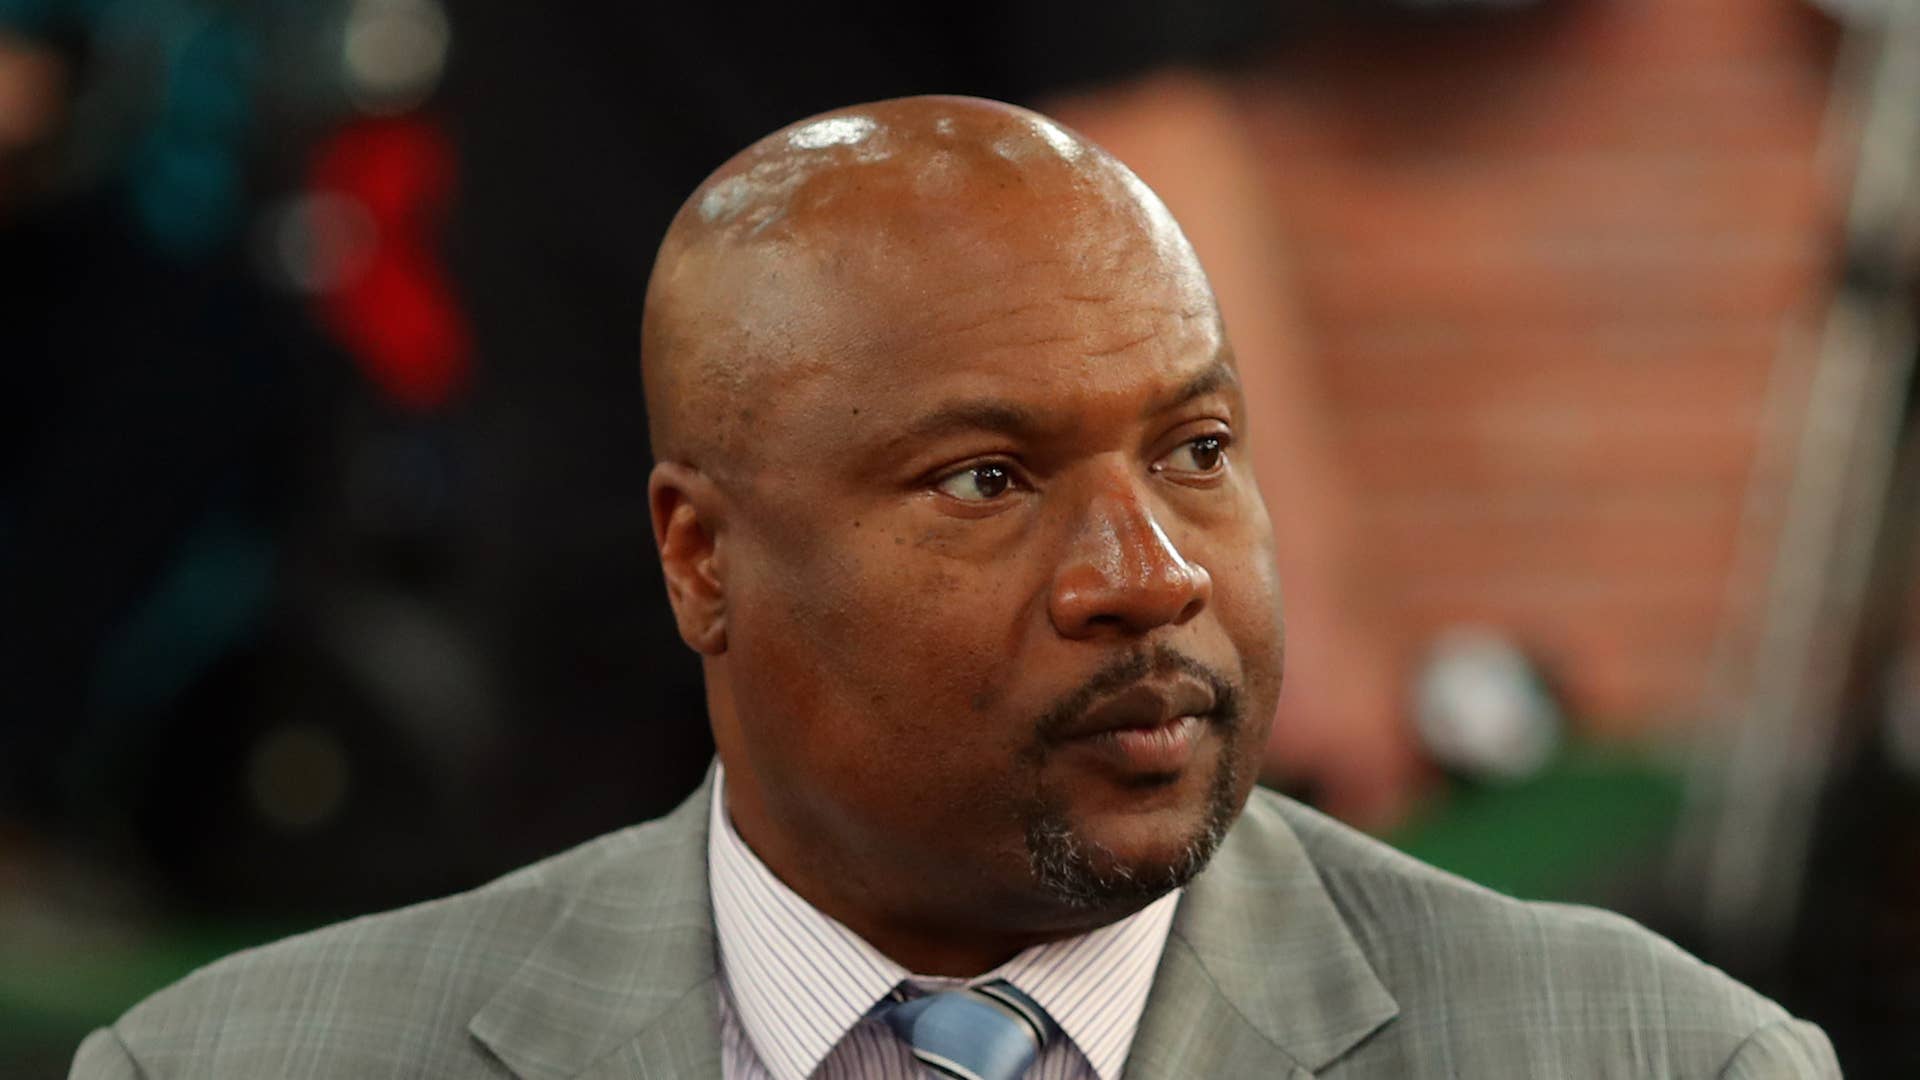 Bo Jackson says he would have never played football had he known